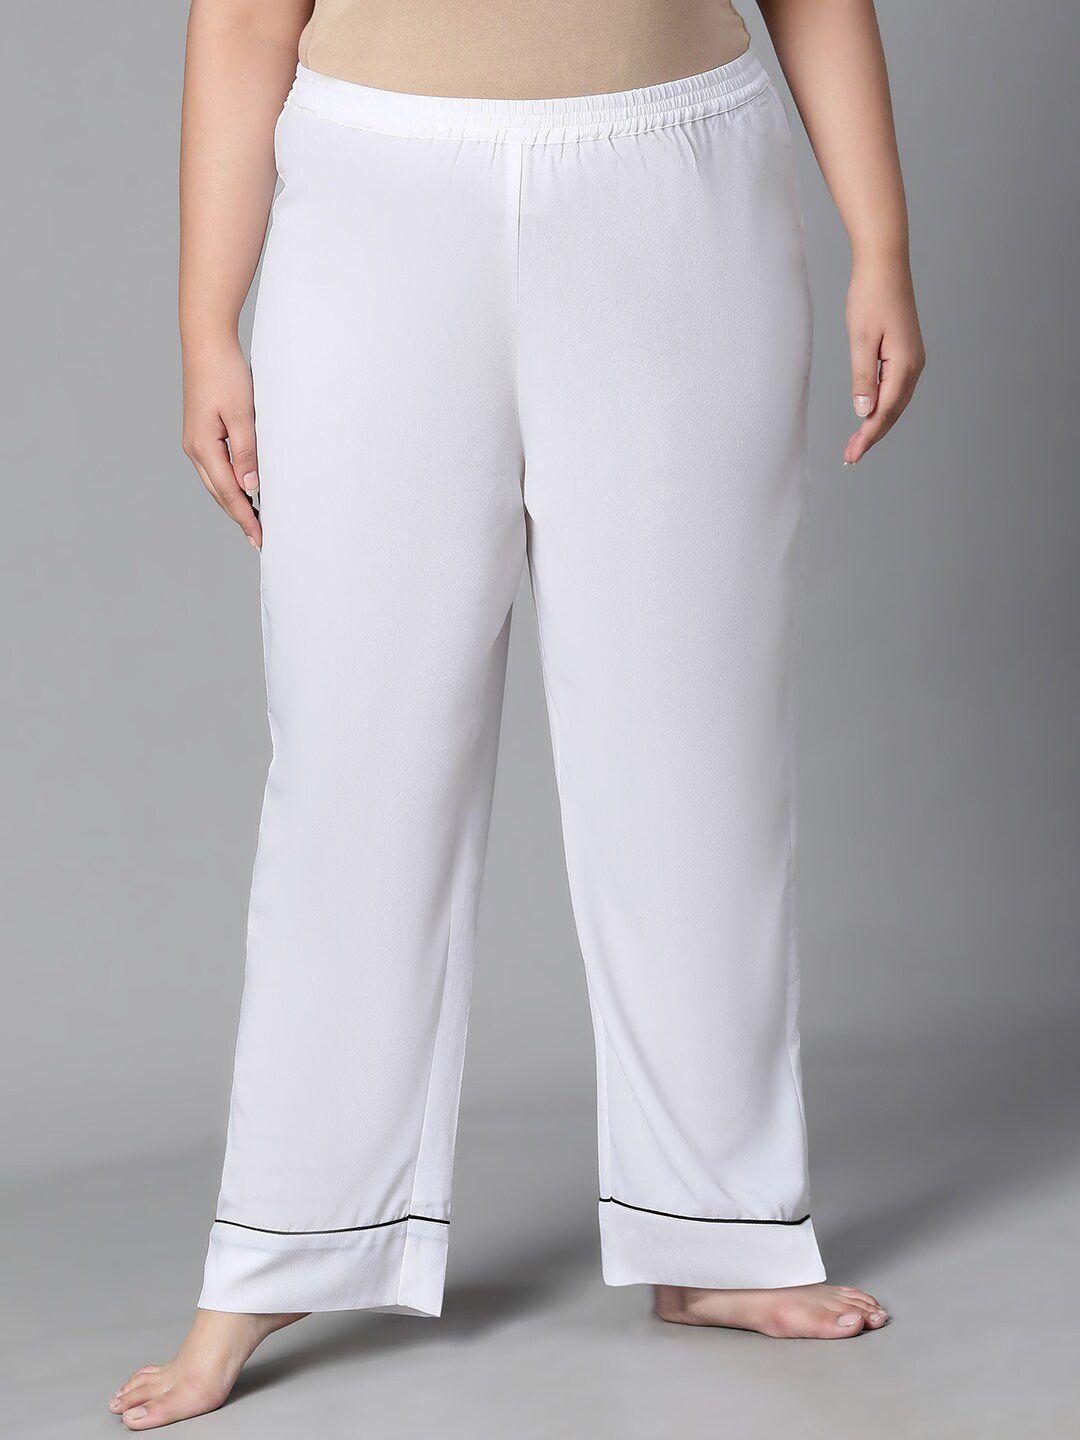 oxolloxo plus size cotton relaxed lounge pants